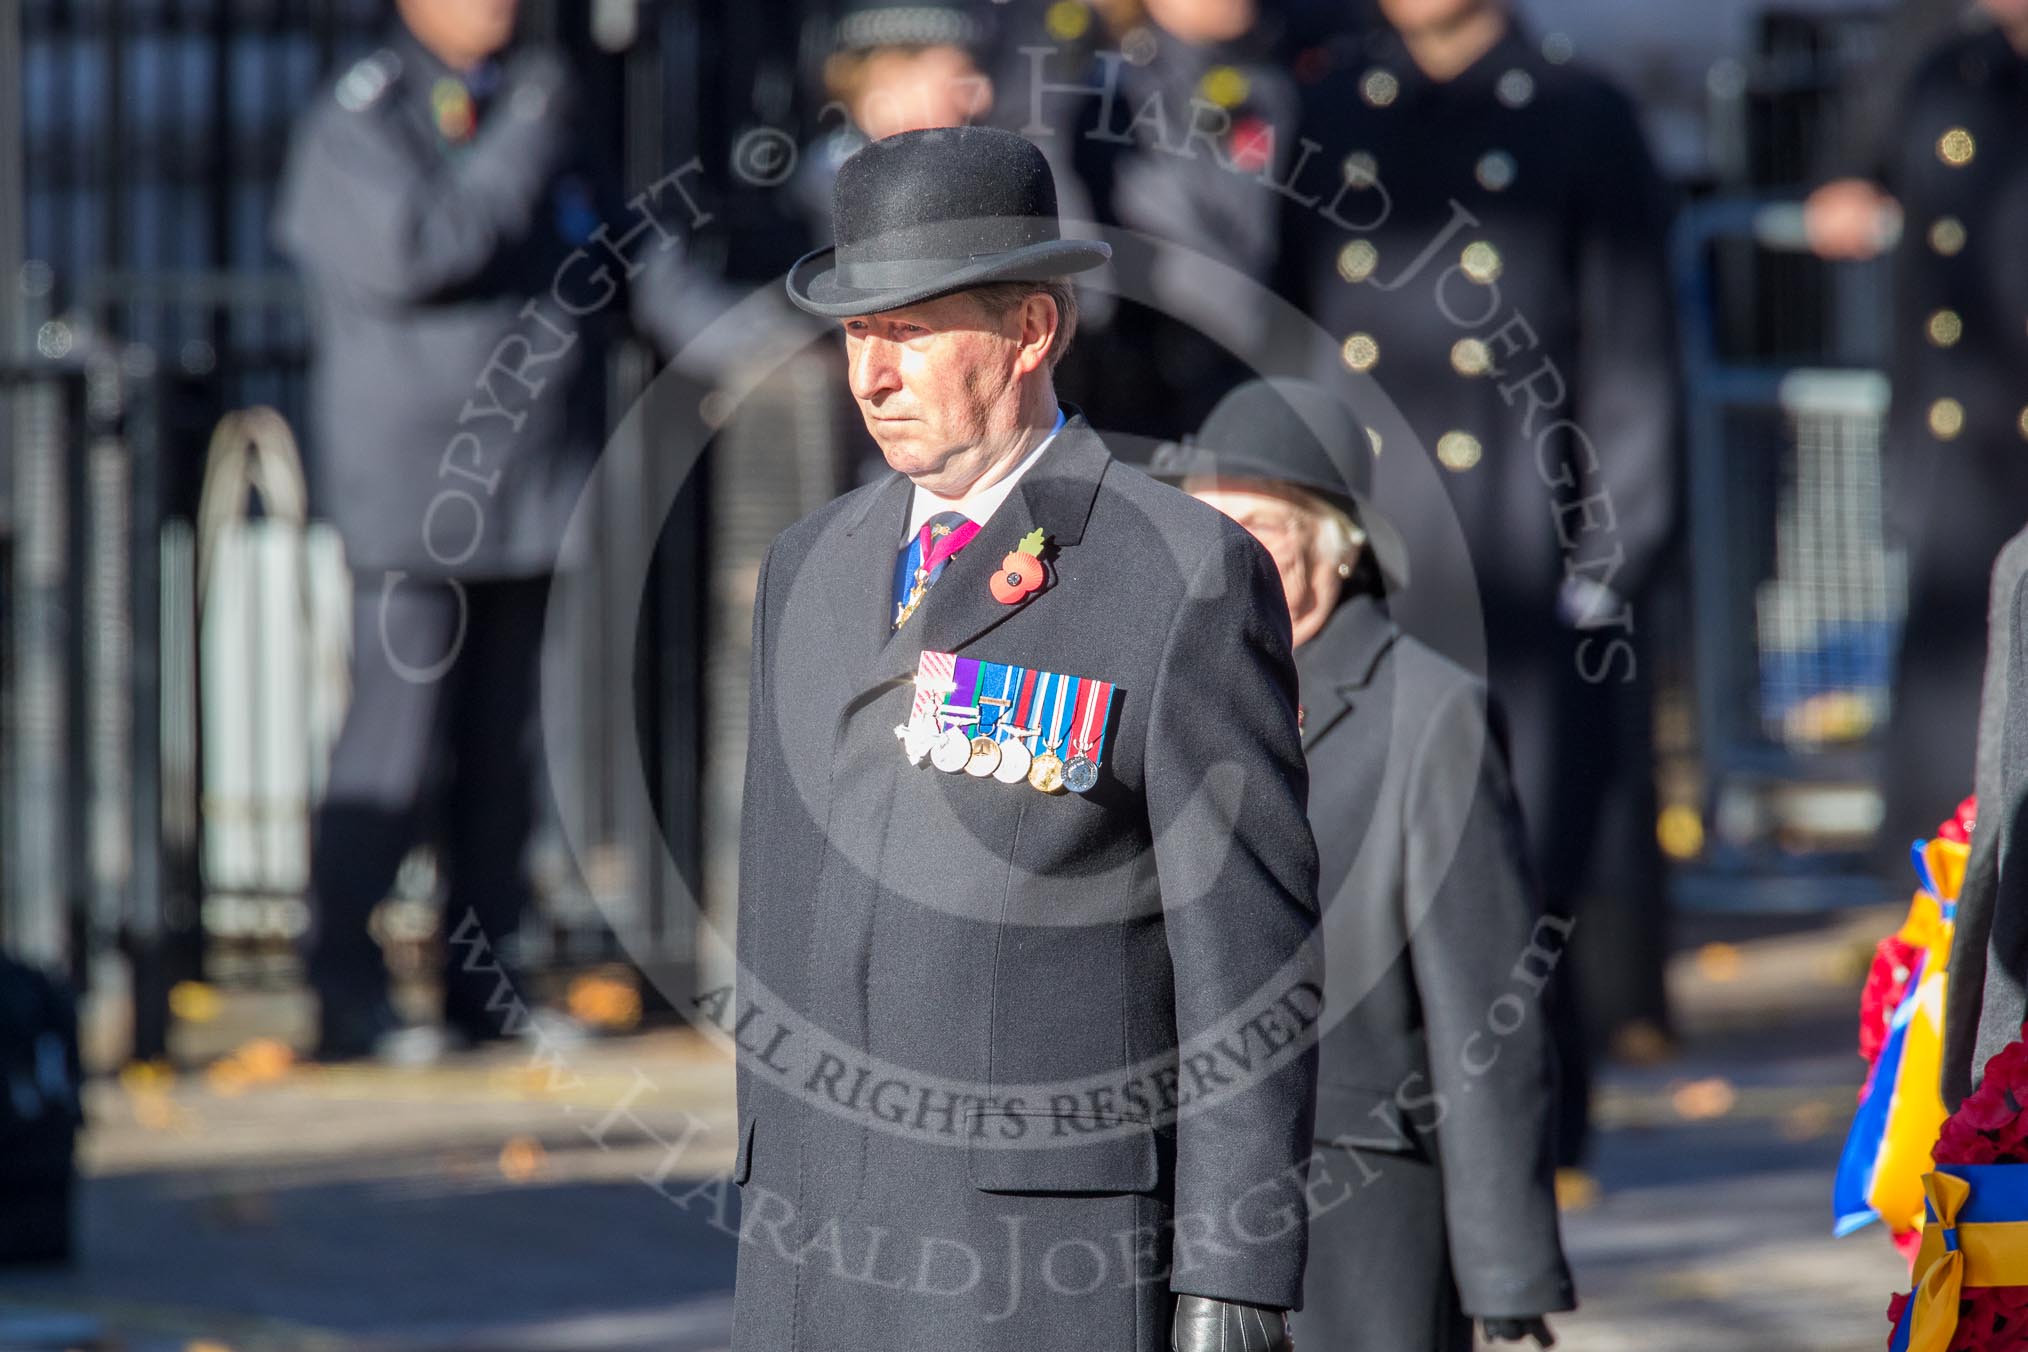 The National President of The Royal British Legion, Air Marshal David Walker, during Remembrance Sunday Cenotaph Ceremony 2018 at Horse Guards Parade, Westminster, London, 11 November 2018, 11:26.